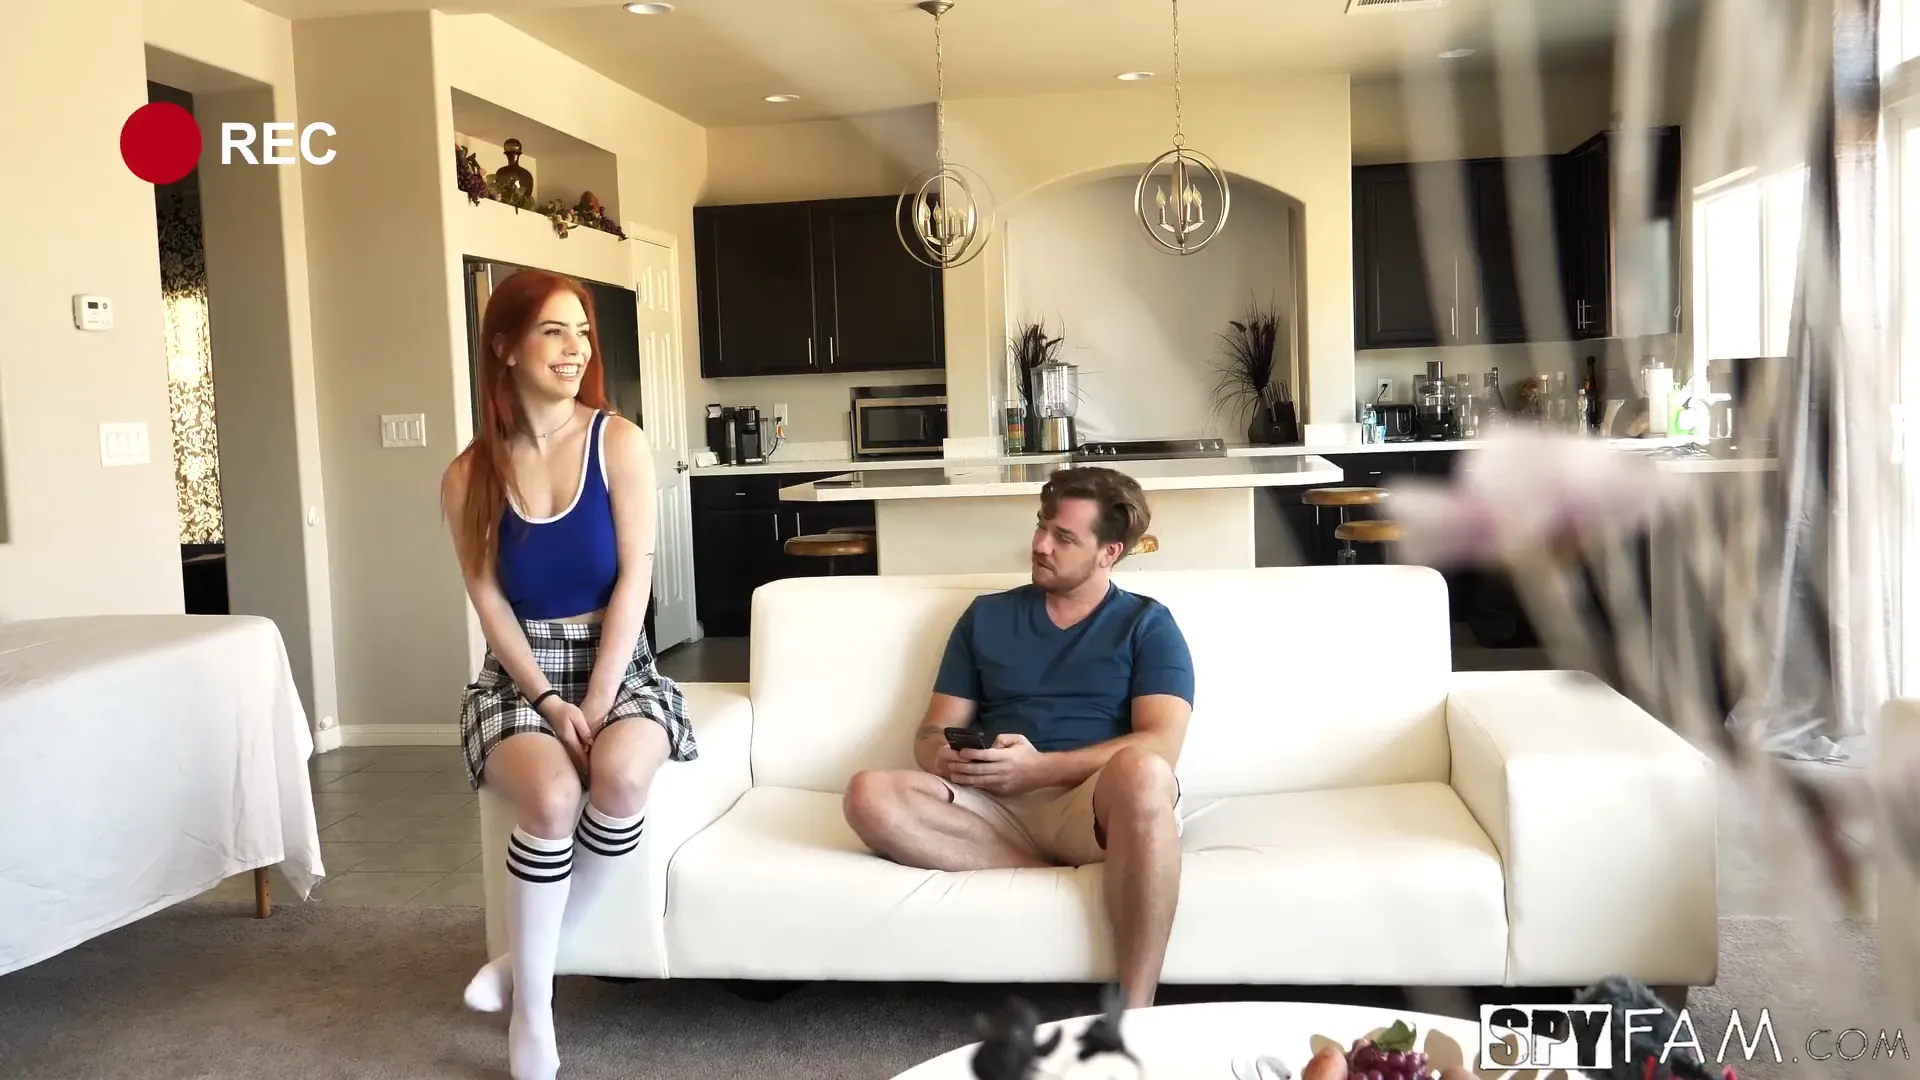 Shameless redhead stepsis gets caught and busted by her stepbrothers hidden image